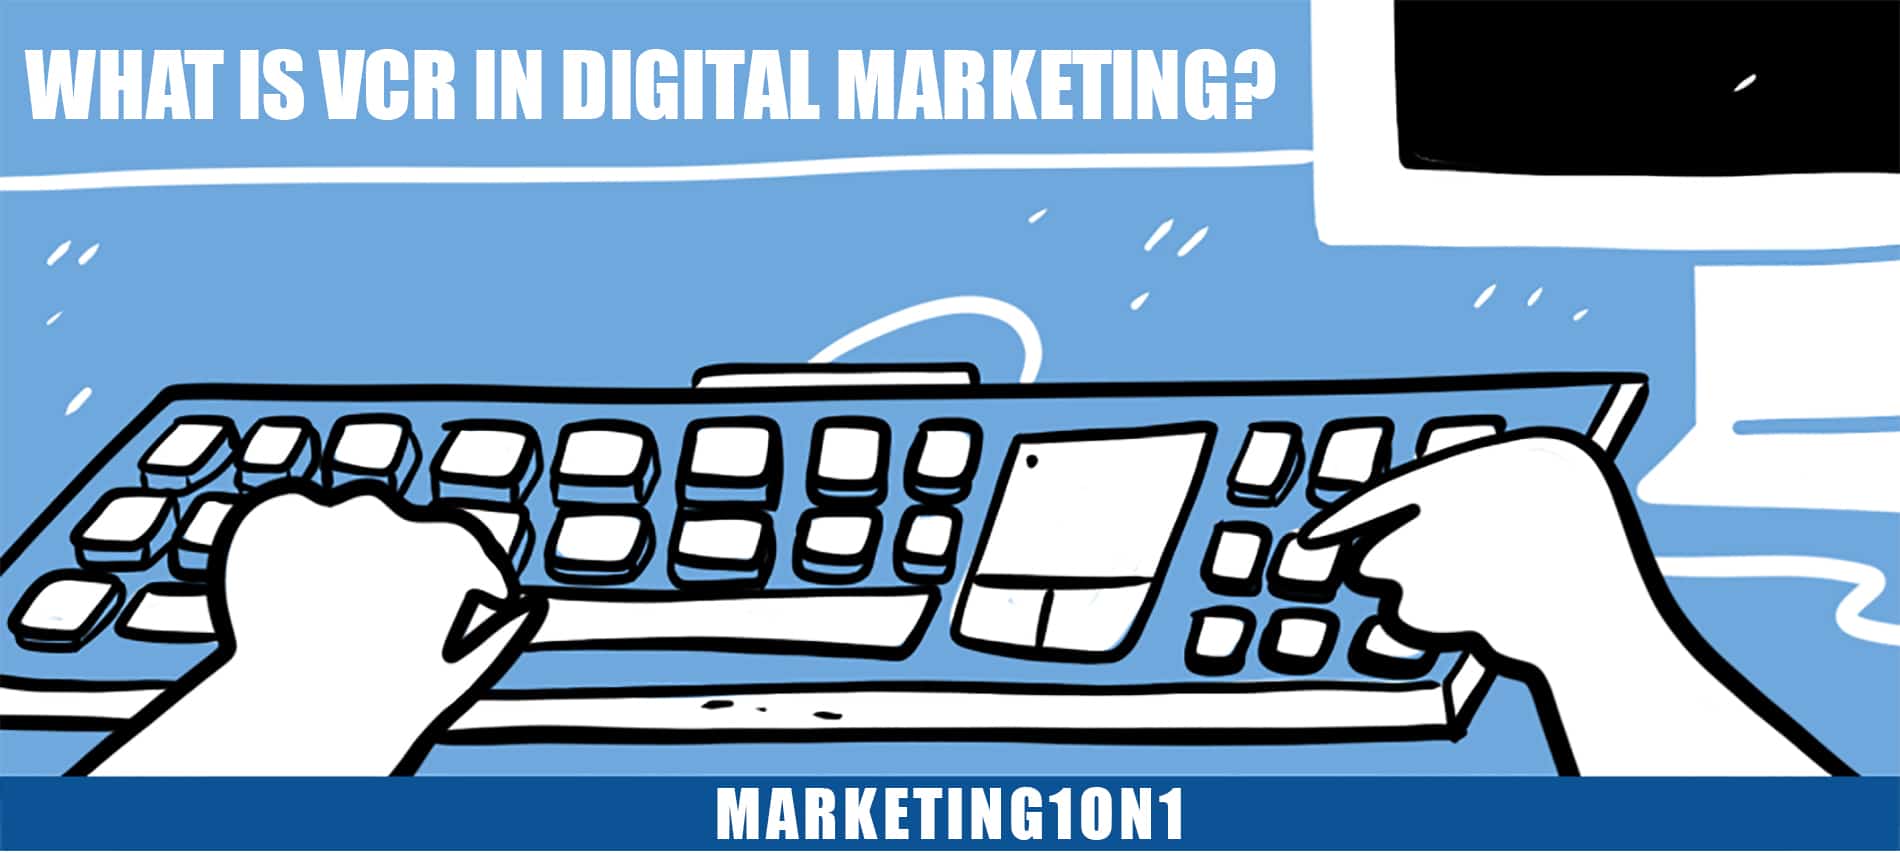 What is VCR in digital marketing?